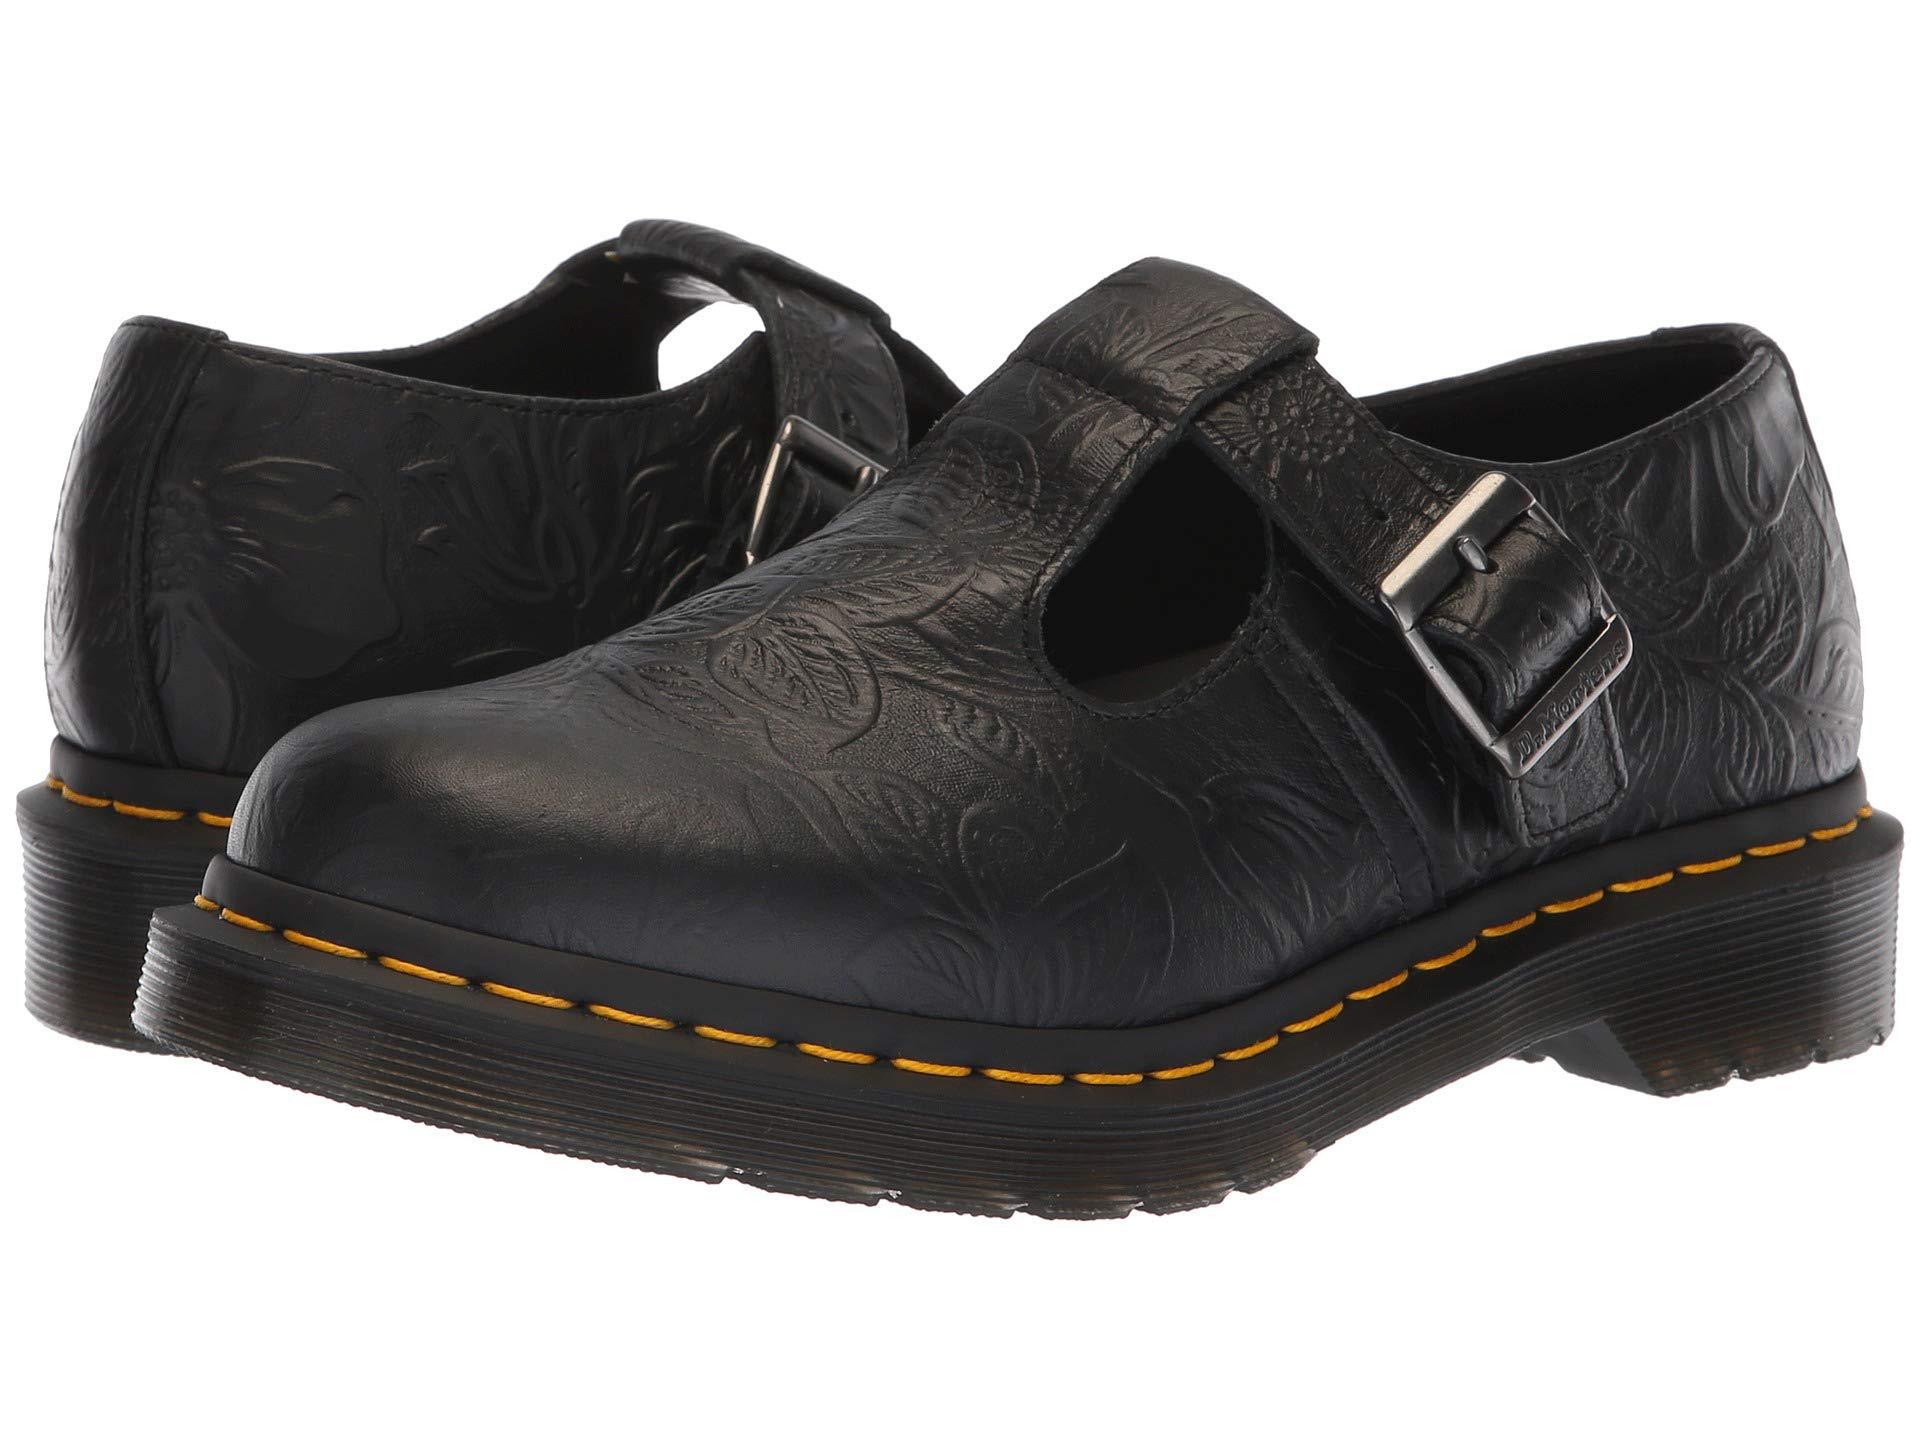 Polley Floral Emboss Dr Martens Shop, 54% OFF | www.smokymountains.org